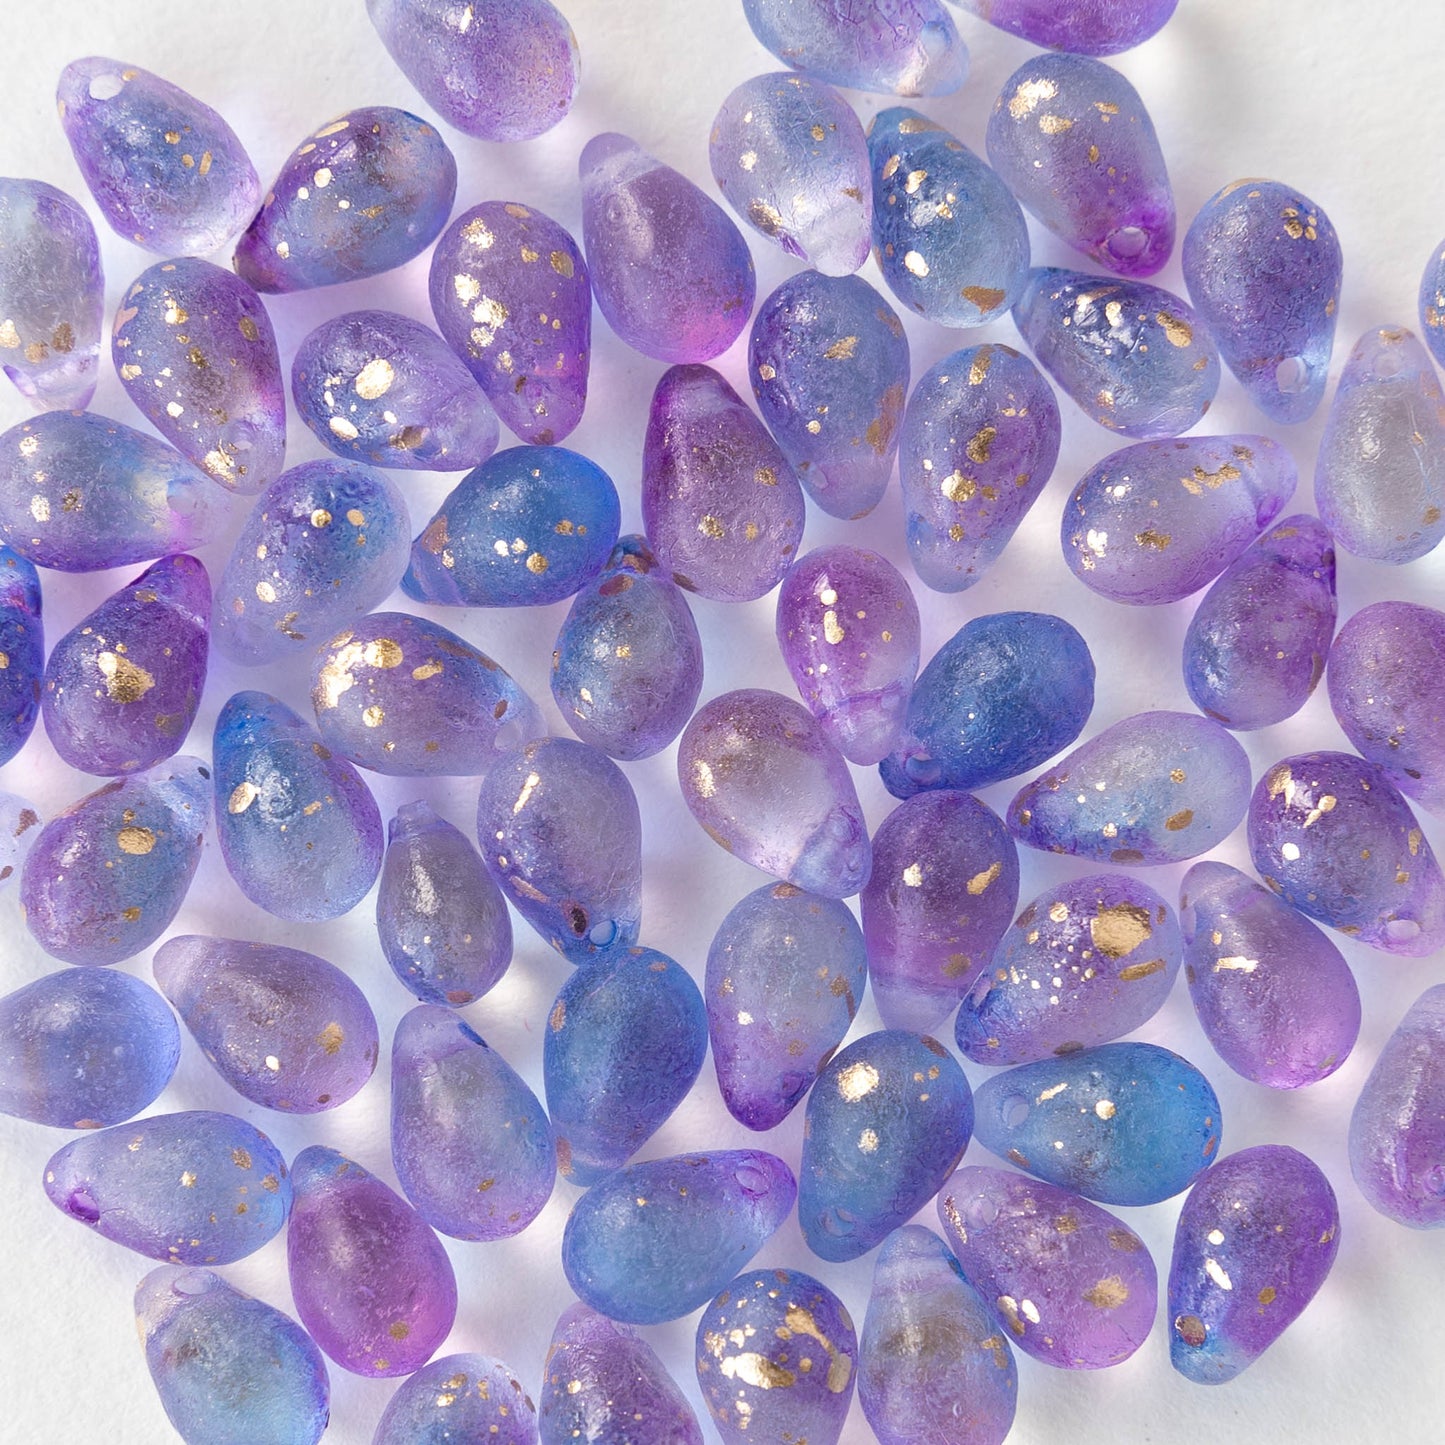 Load image into Gallery viewer, 6x9mm Glass Teardrop Beads - Matte Lavender blue mix with Gold Dust - 50 Beads
